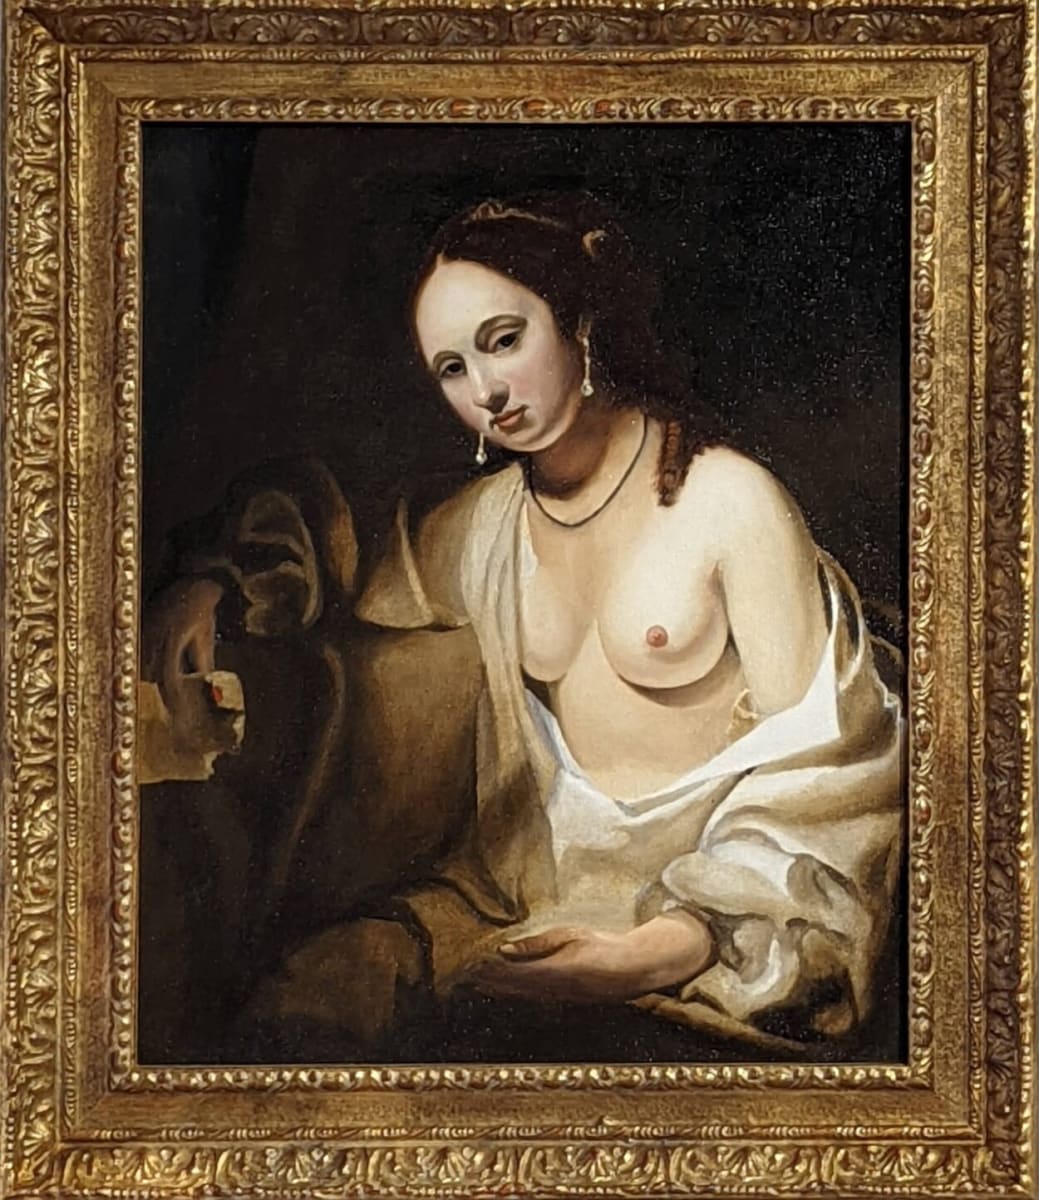 Bathsheba after Willem Drost by André Romijn  Image: Bathsheba after Willem Drost